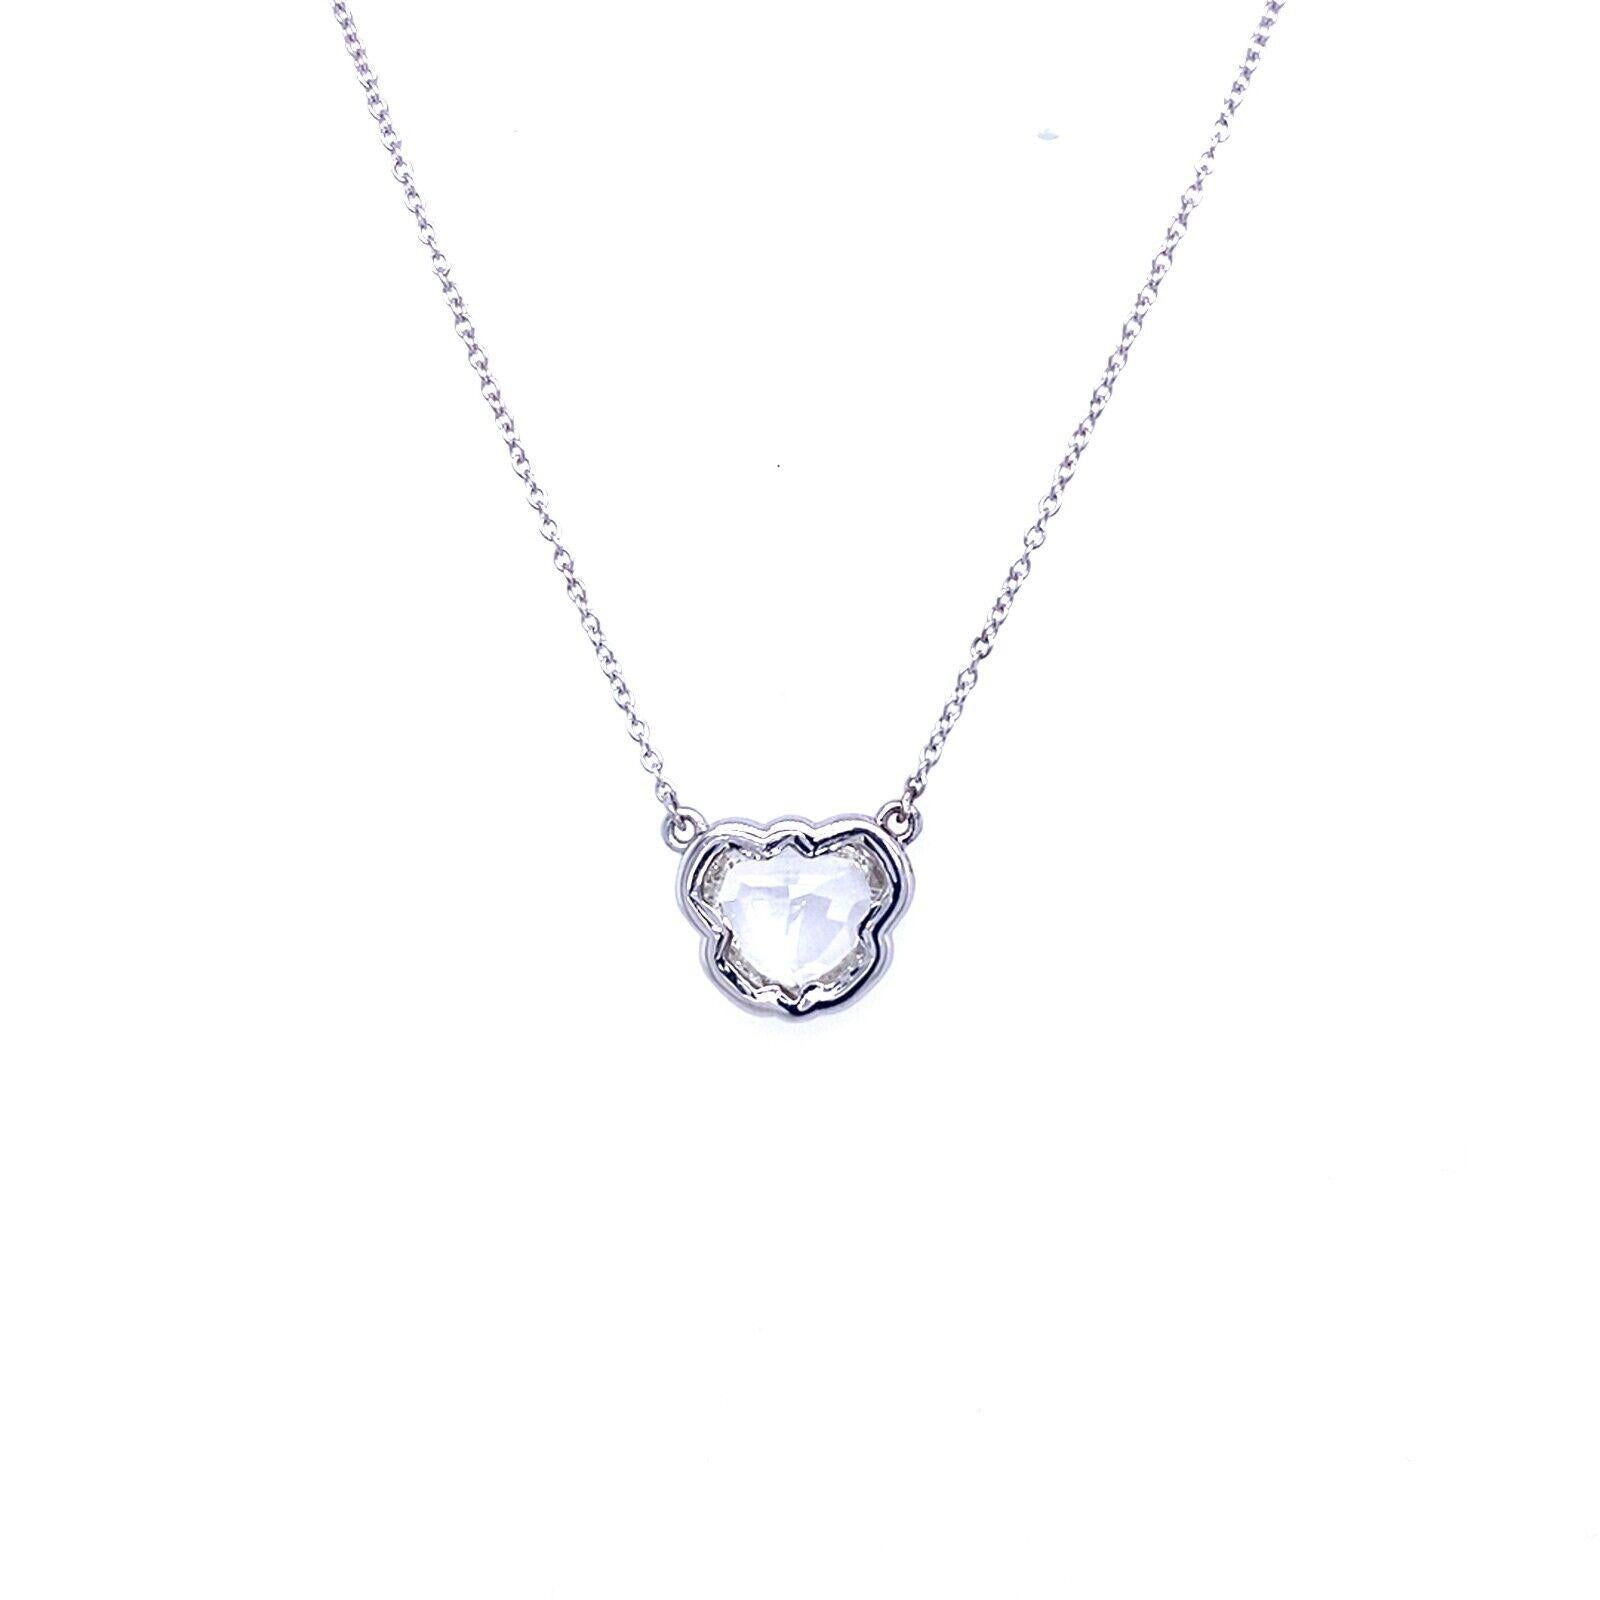 This Diamond pendant features a 1.08ct natural shield-shaped diamond that is graded H-I/VS clarity   The diamond is set in a 18ct White Gold frame and can be worn with a 16-inch or 18-inch 18ct White Gold chain. This pendant is a perfect gift for